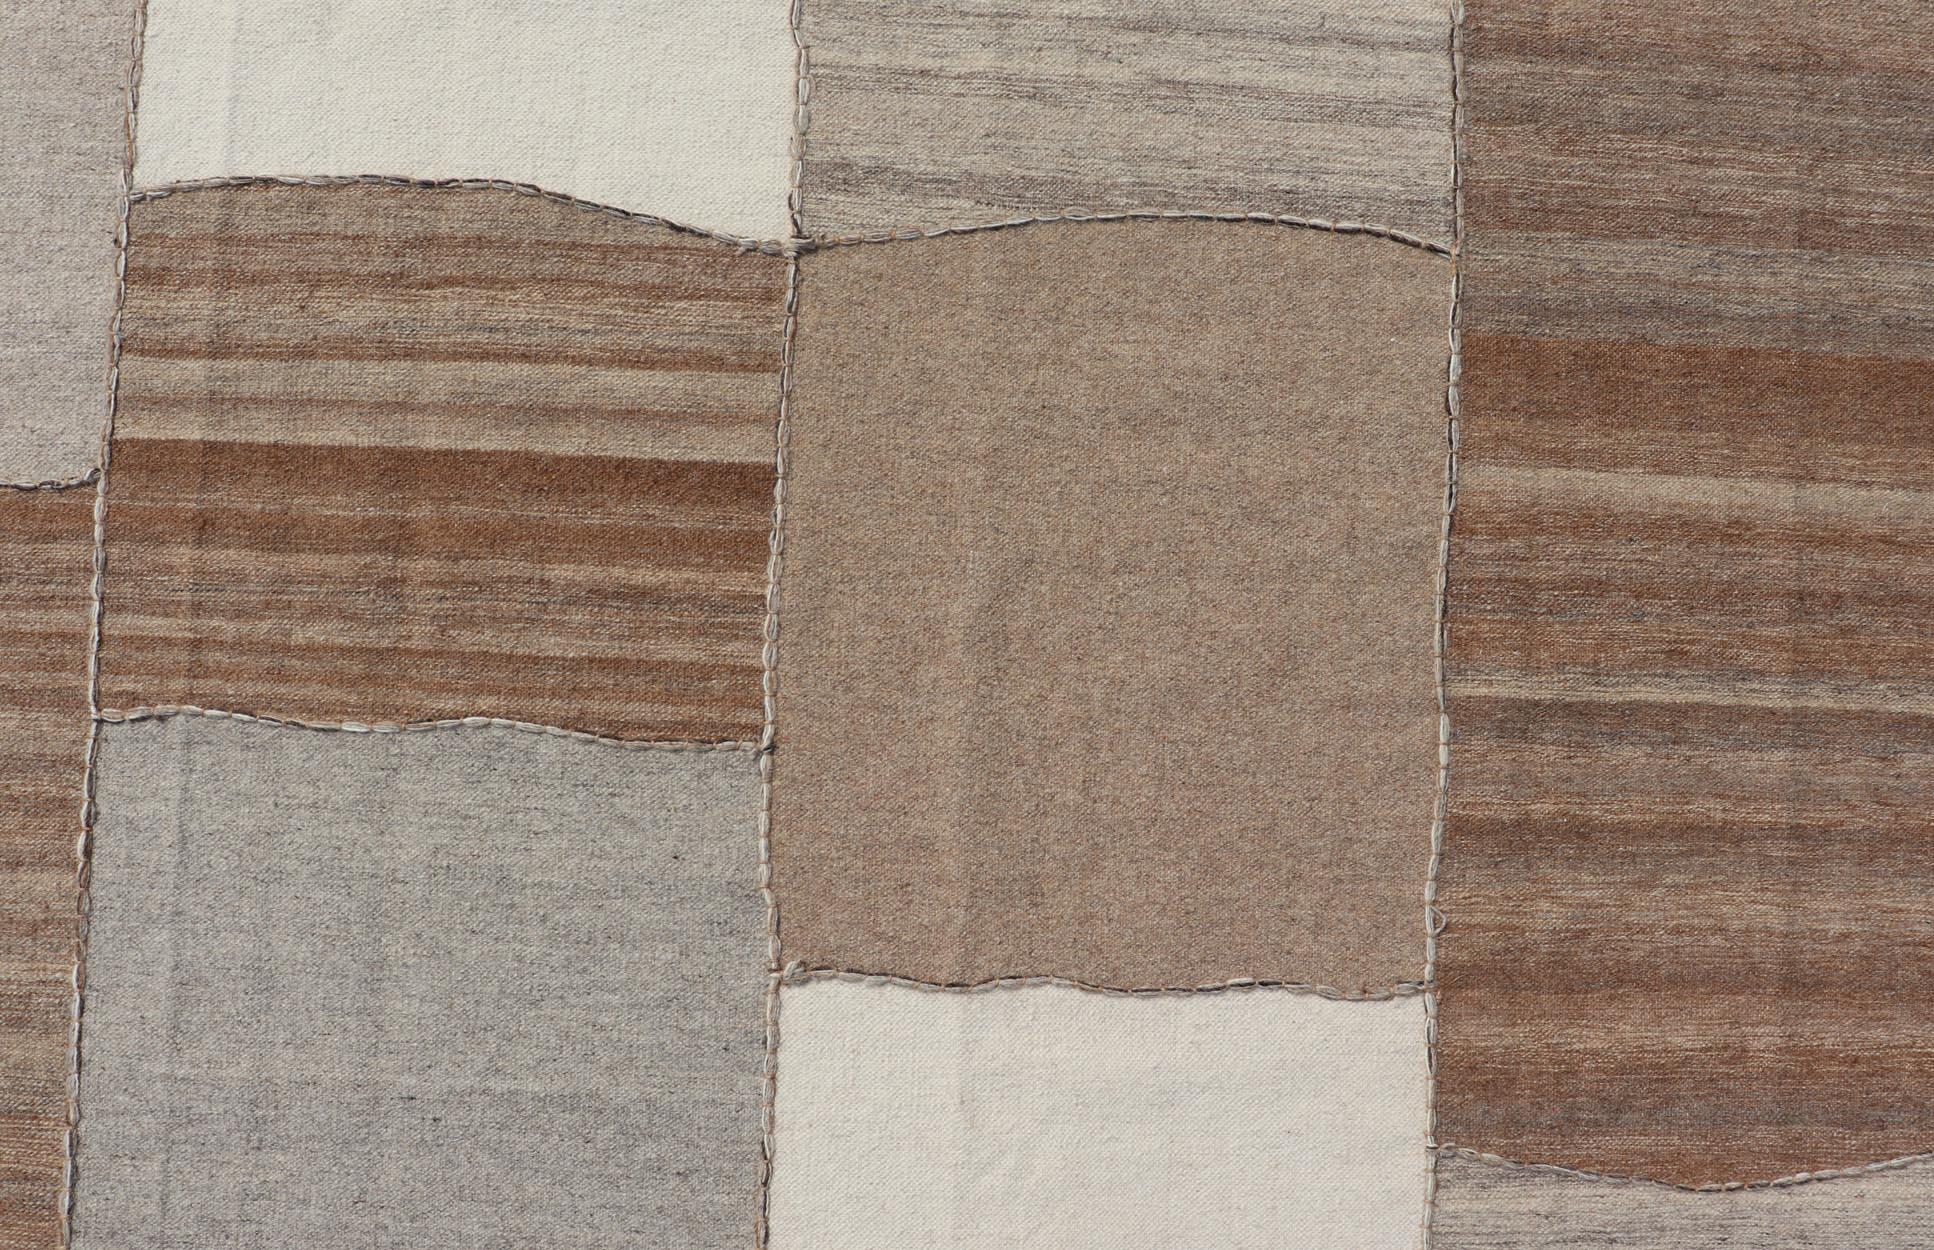 Modern Kilim Rug in Multi-Panel Striped Design with Brown, Gray, White and Taupe In New Condition For Sale In Atlanta, GA